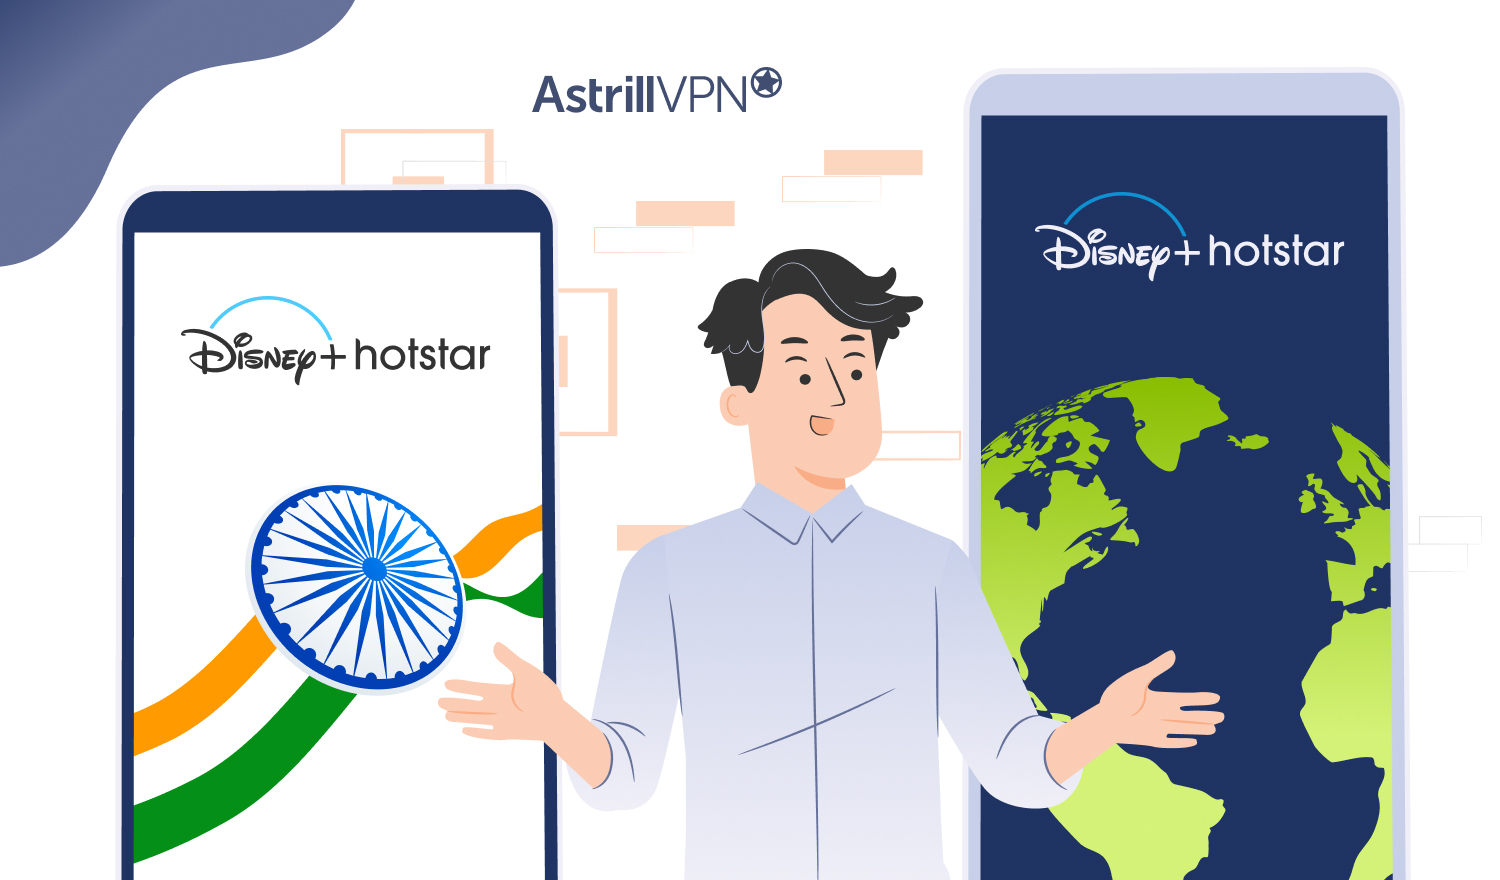 How is Indian Disney+ Hotstar Different from the Other Disney+ Hotstar